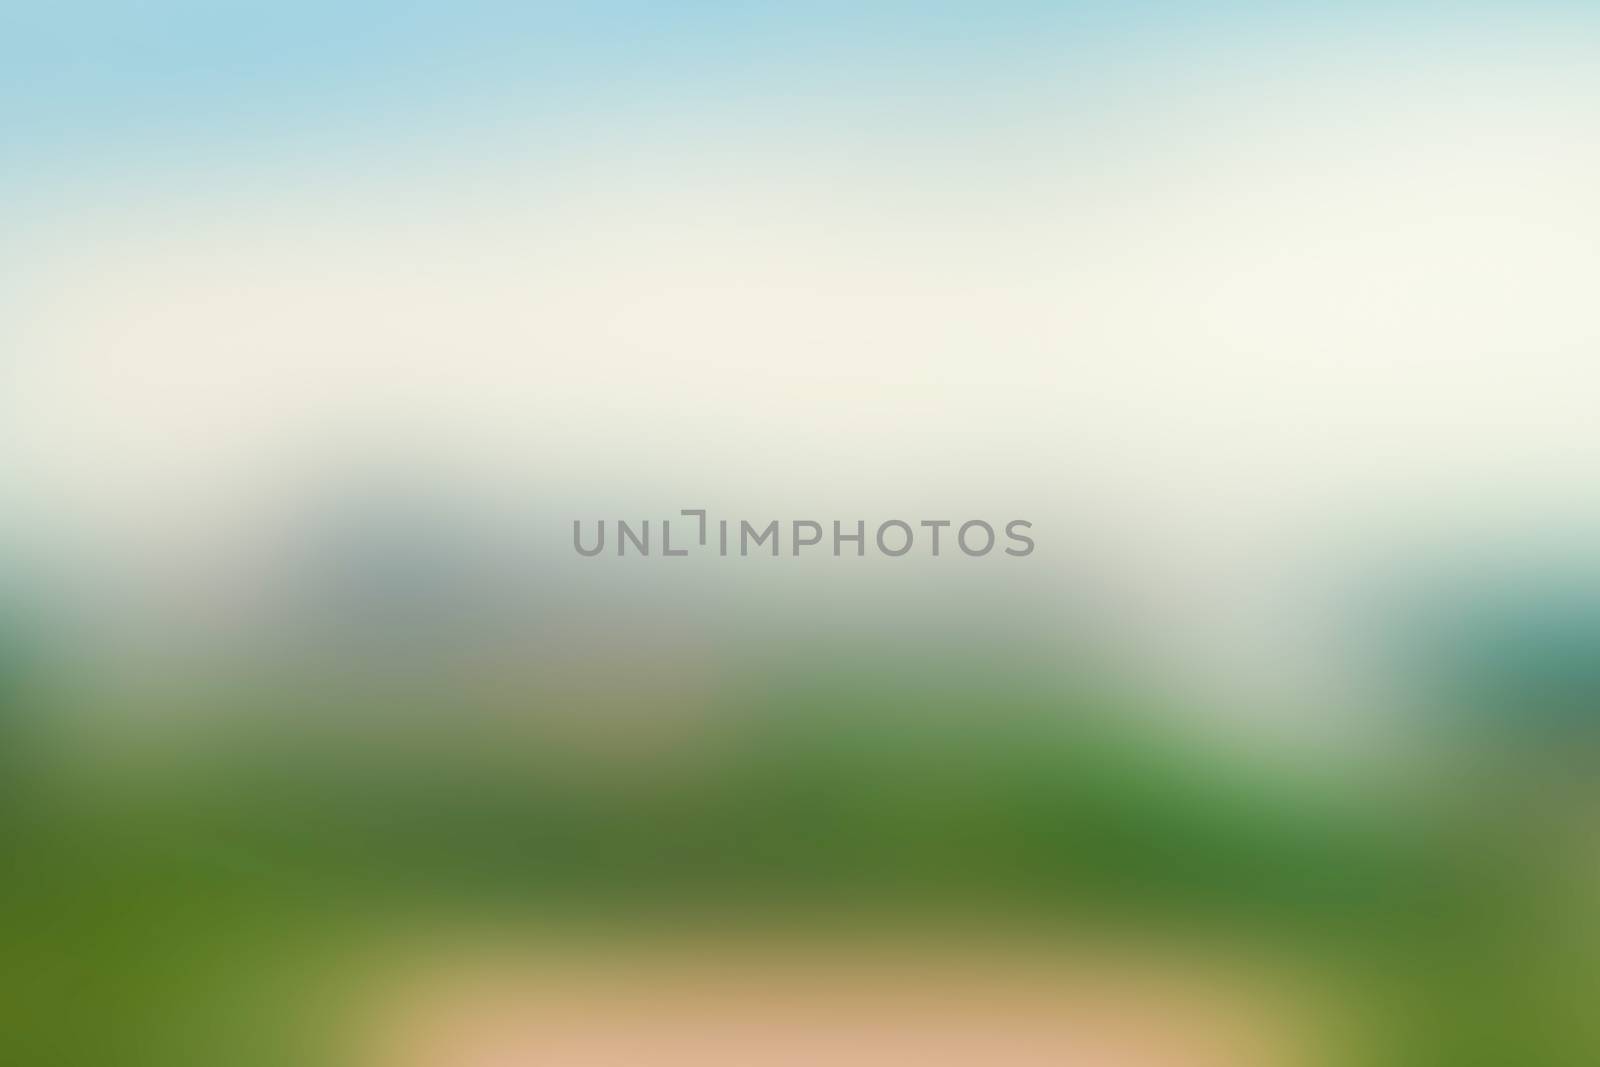 Blue green abstract blurred background by sengnsp